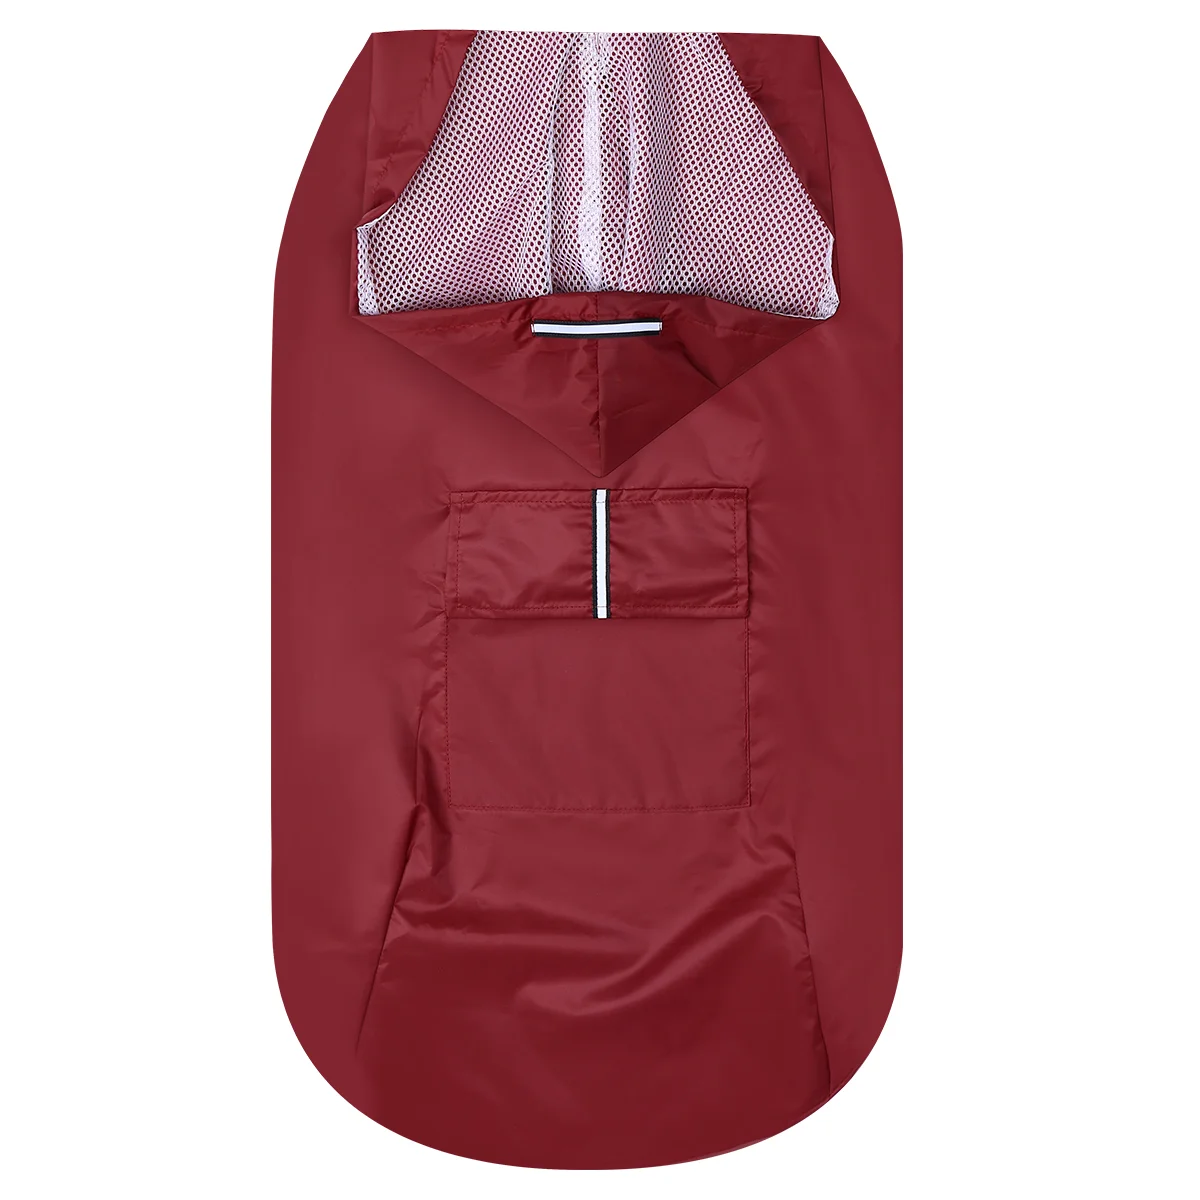 

POPETPOP Reflective Hooded Pet Dog Raincoats Big Dogs Waterproof Clothes Dog Raincoat Puppy Poncho(Red, 5XL)